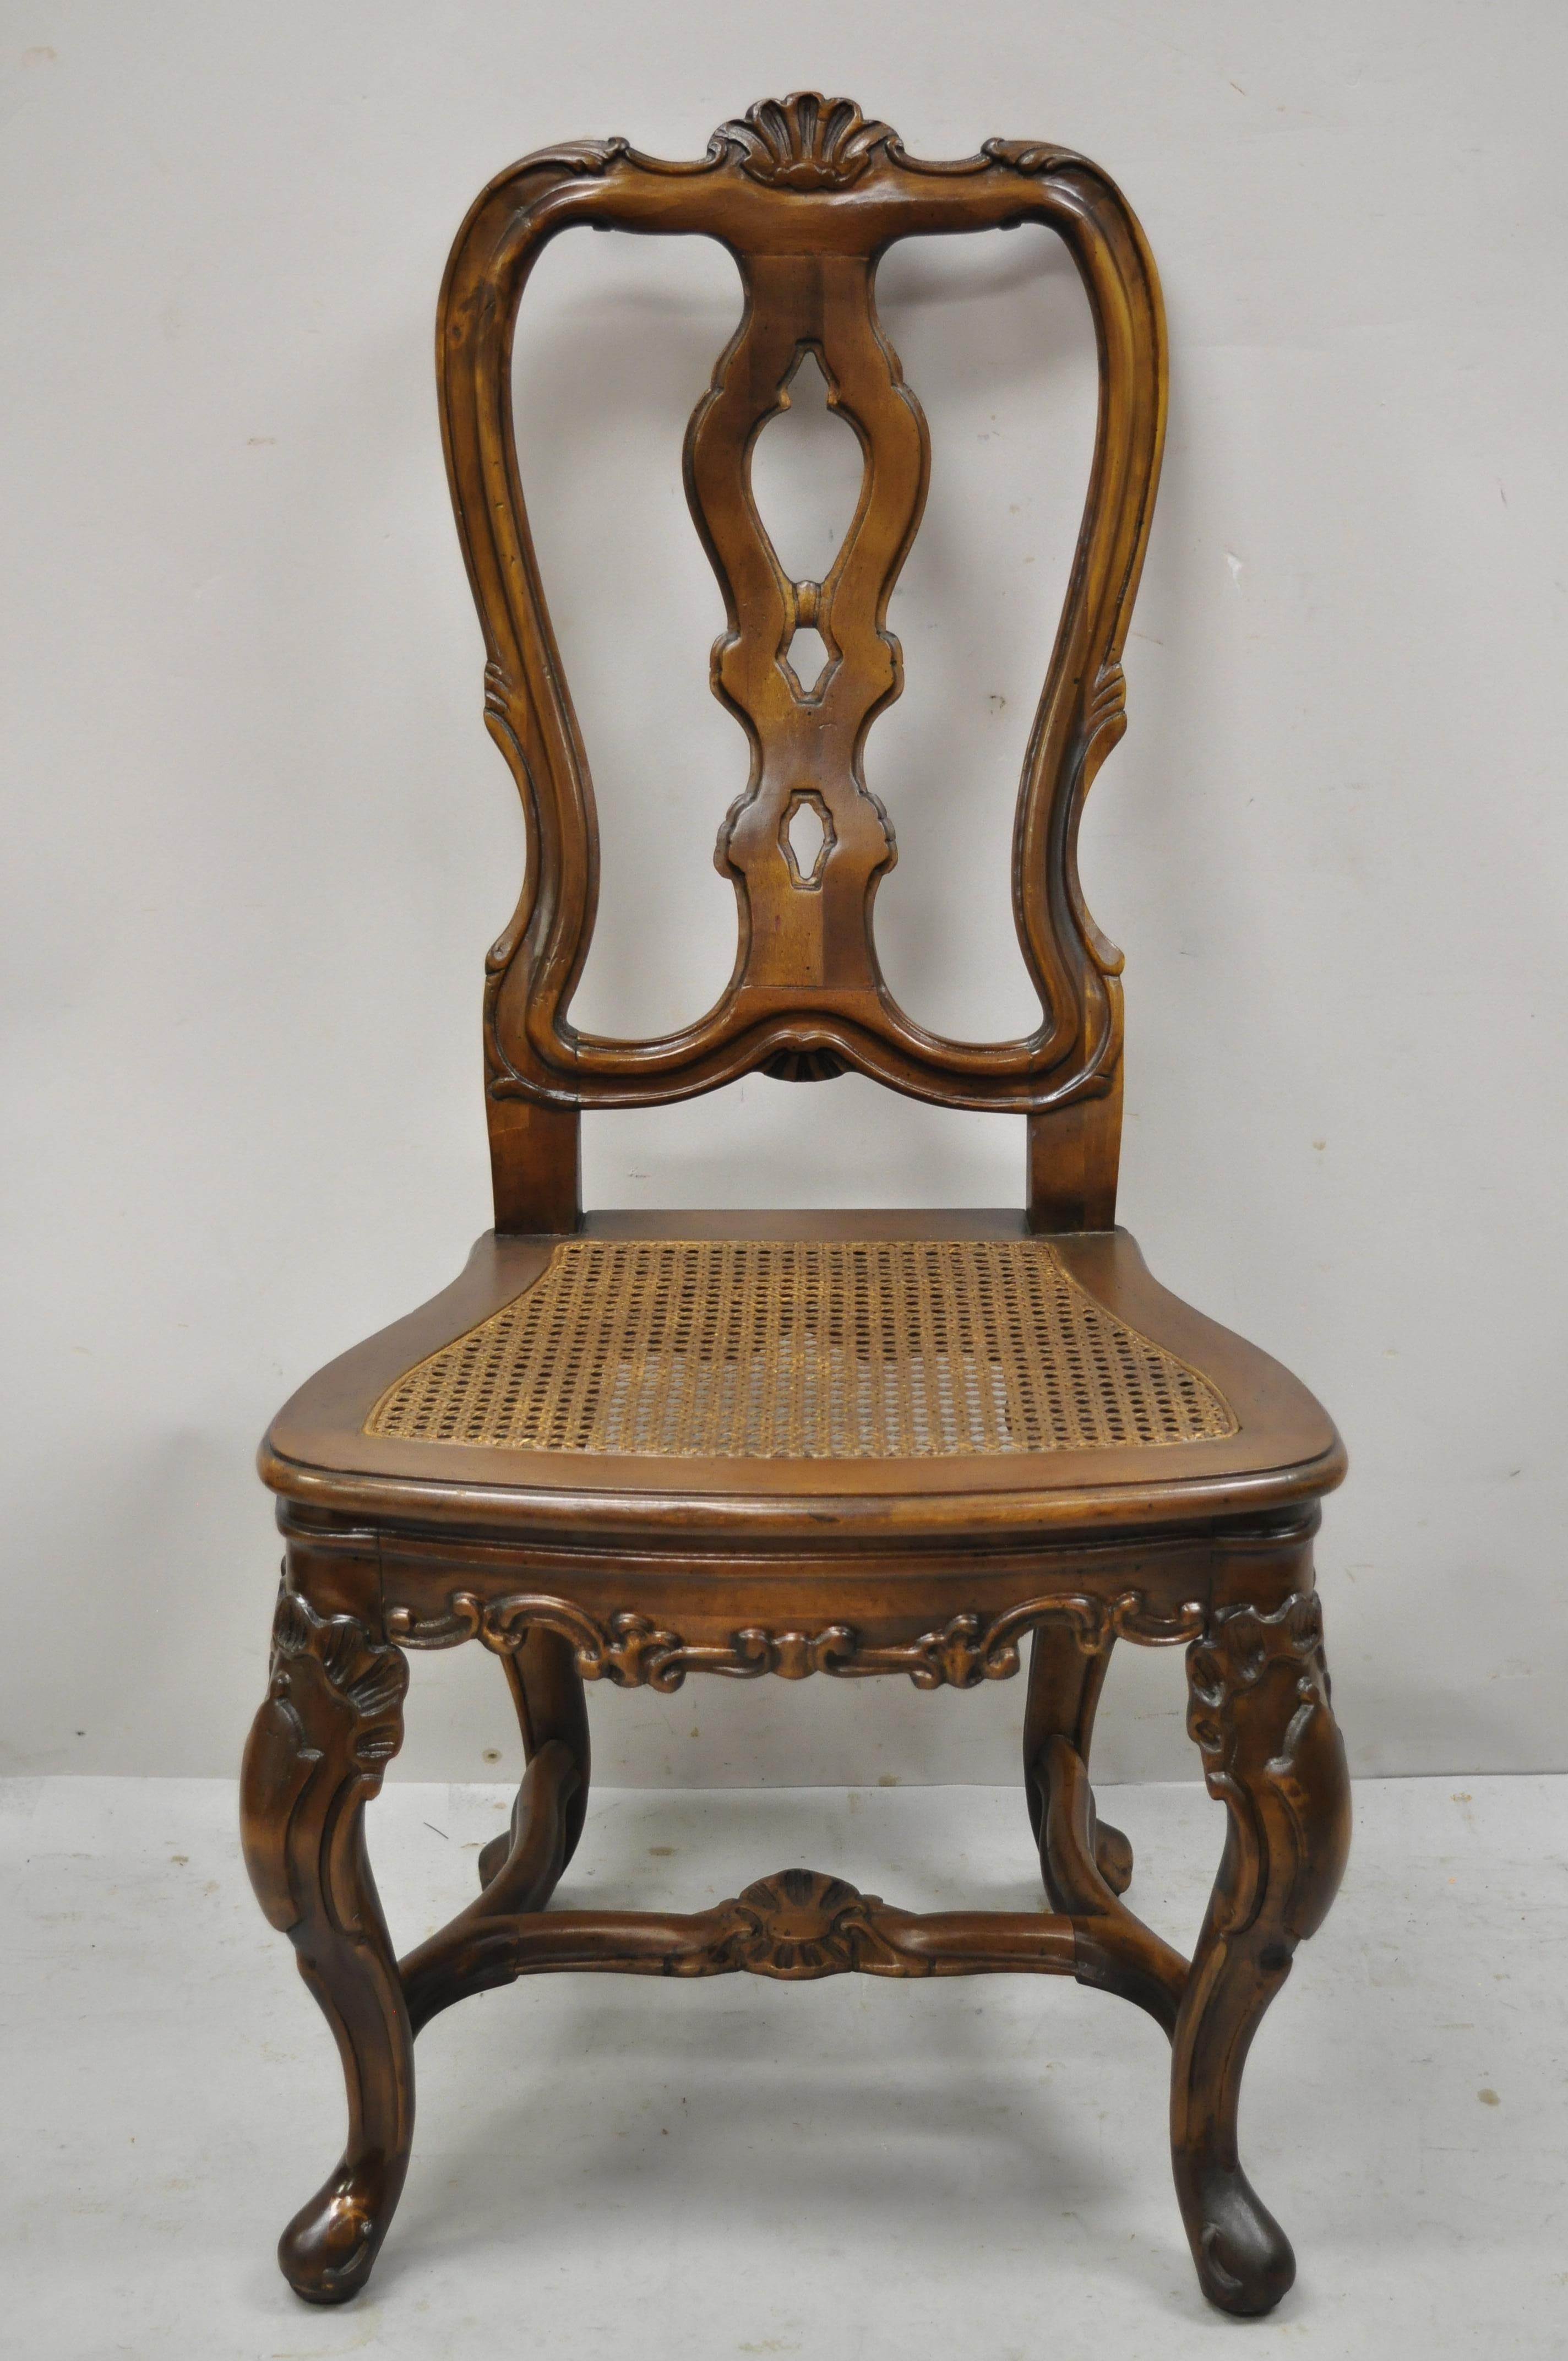 Spanish Rococo Baroque Style Solid Pine Wood Cane Seat Dining Chairs, Set of 4 4